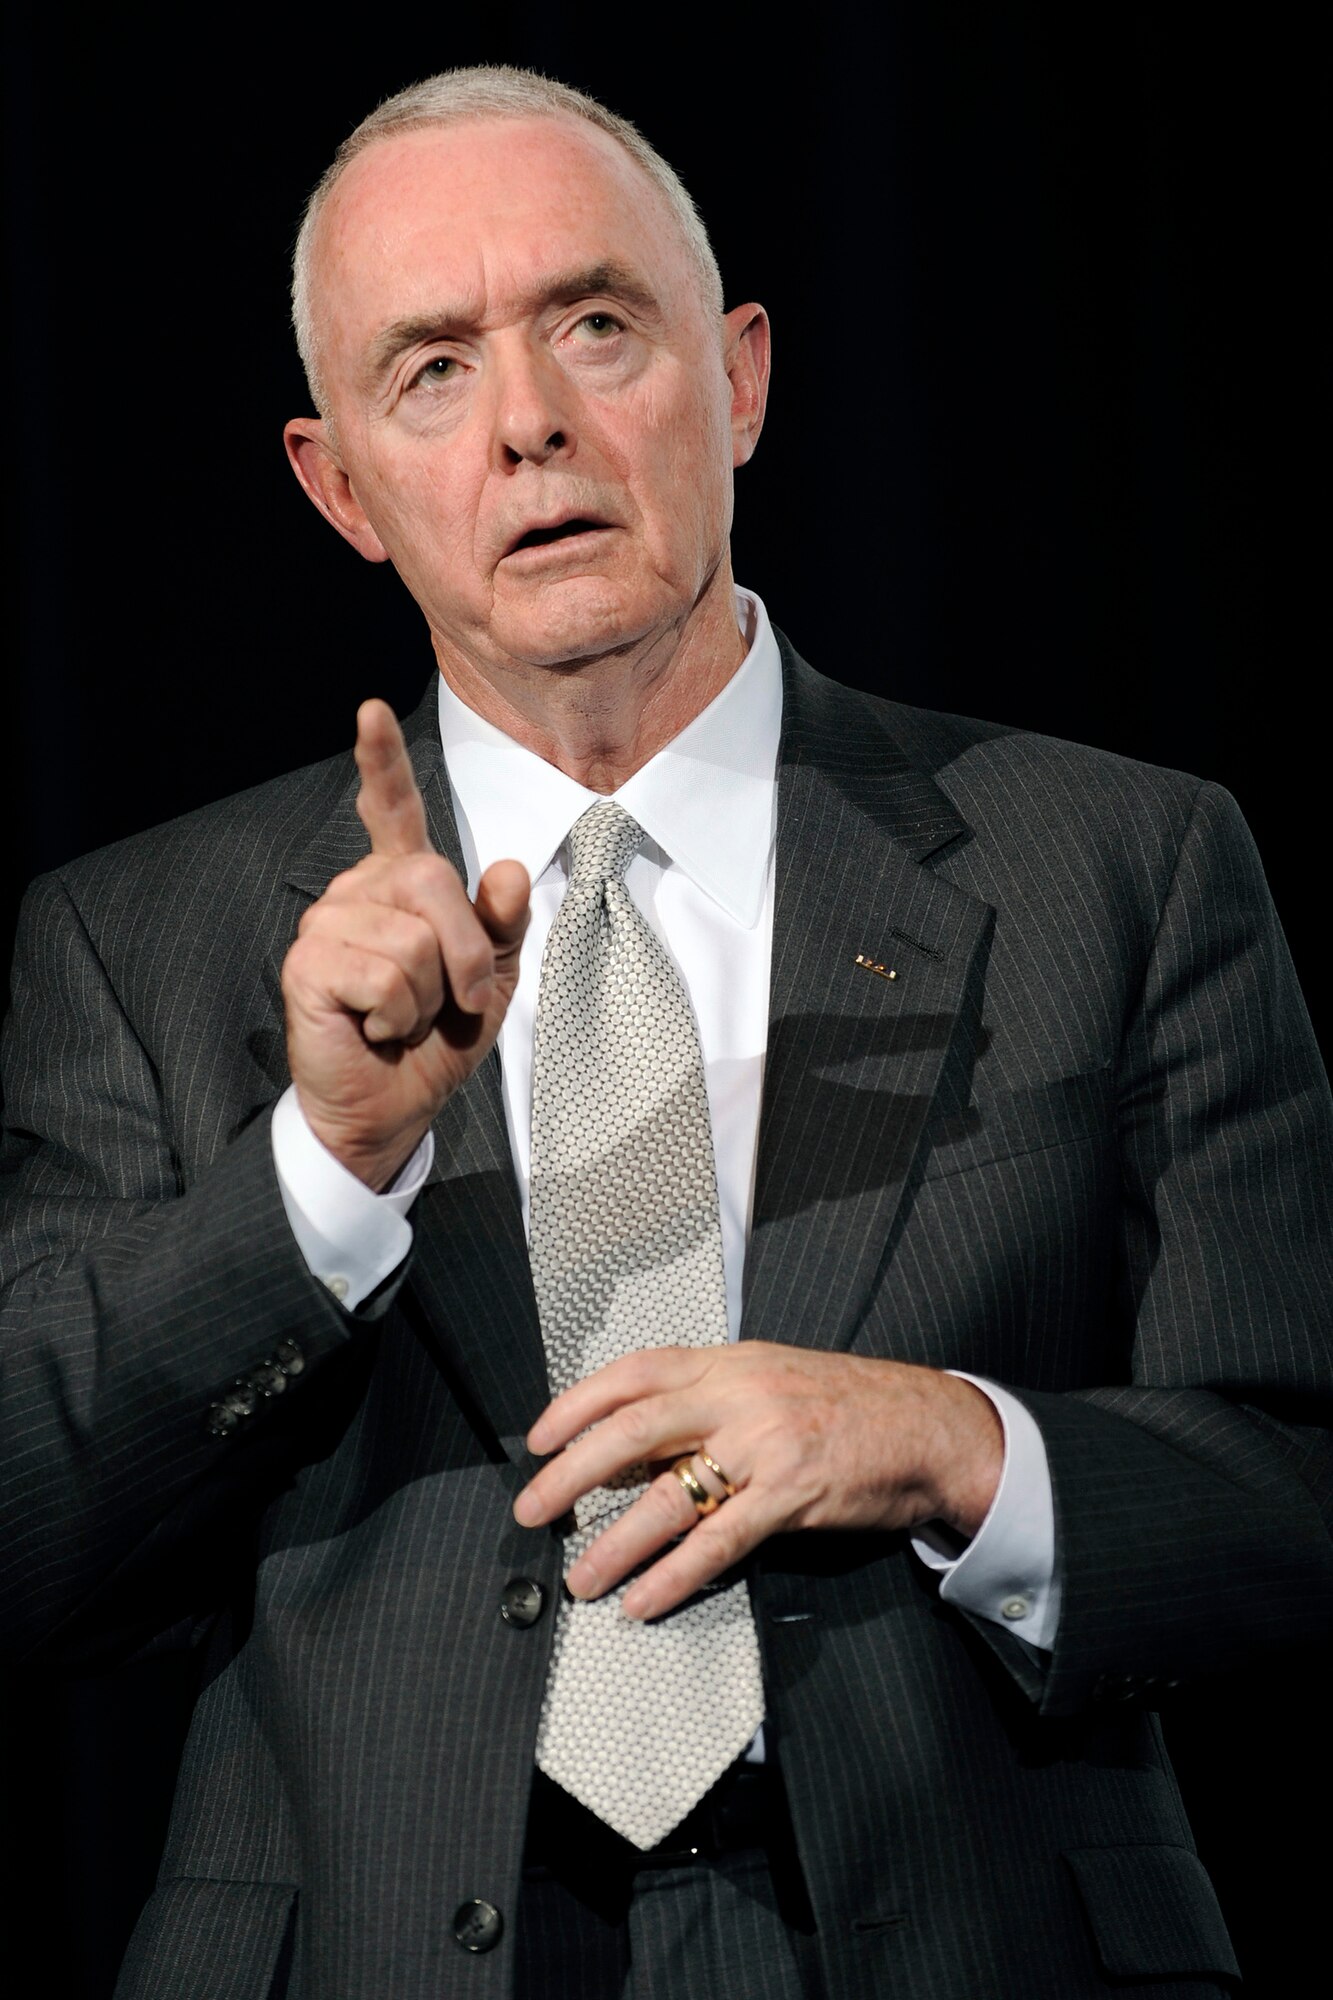 Retired Army Gen. Barry McCaffrey speaks at the U.S. Air Force Academy in Colorado Springs, Colo., during a visit to the Academy May 7, 2009. General McCaffrey is an adjunct professor with the U.S. Military Academy and an analyst with NBC and MSNBC. (U.S. Air Force photo/Dave Ahlschwede)